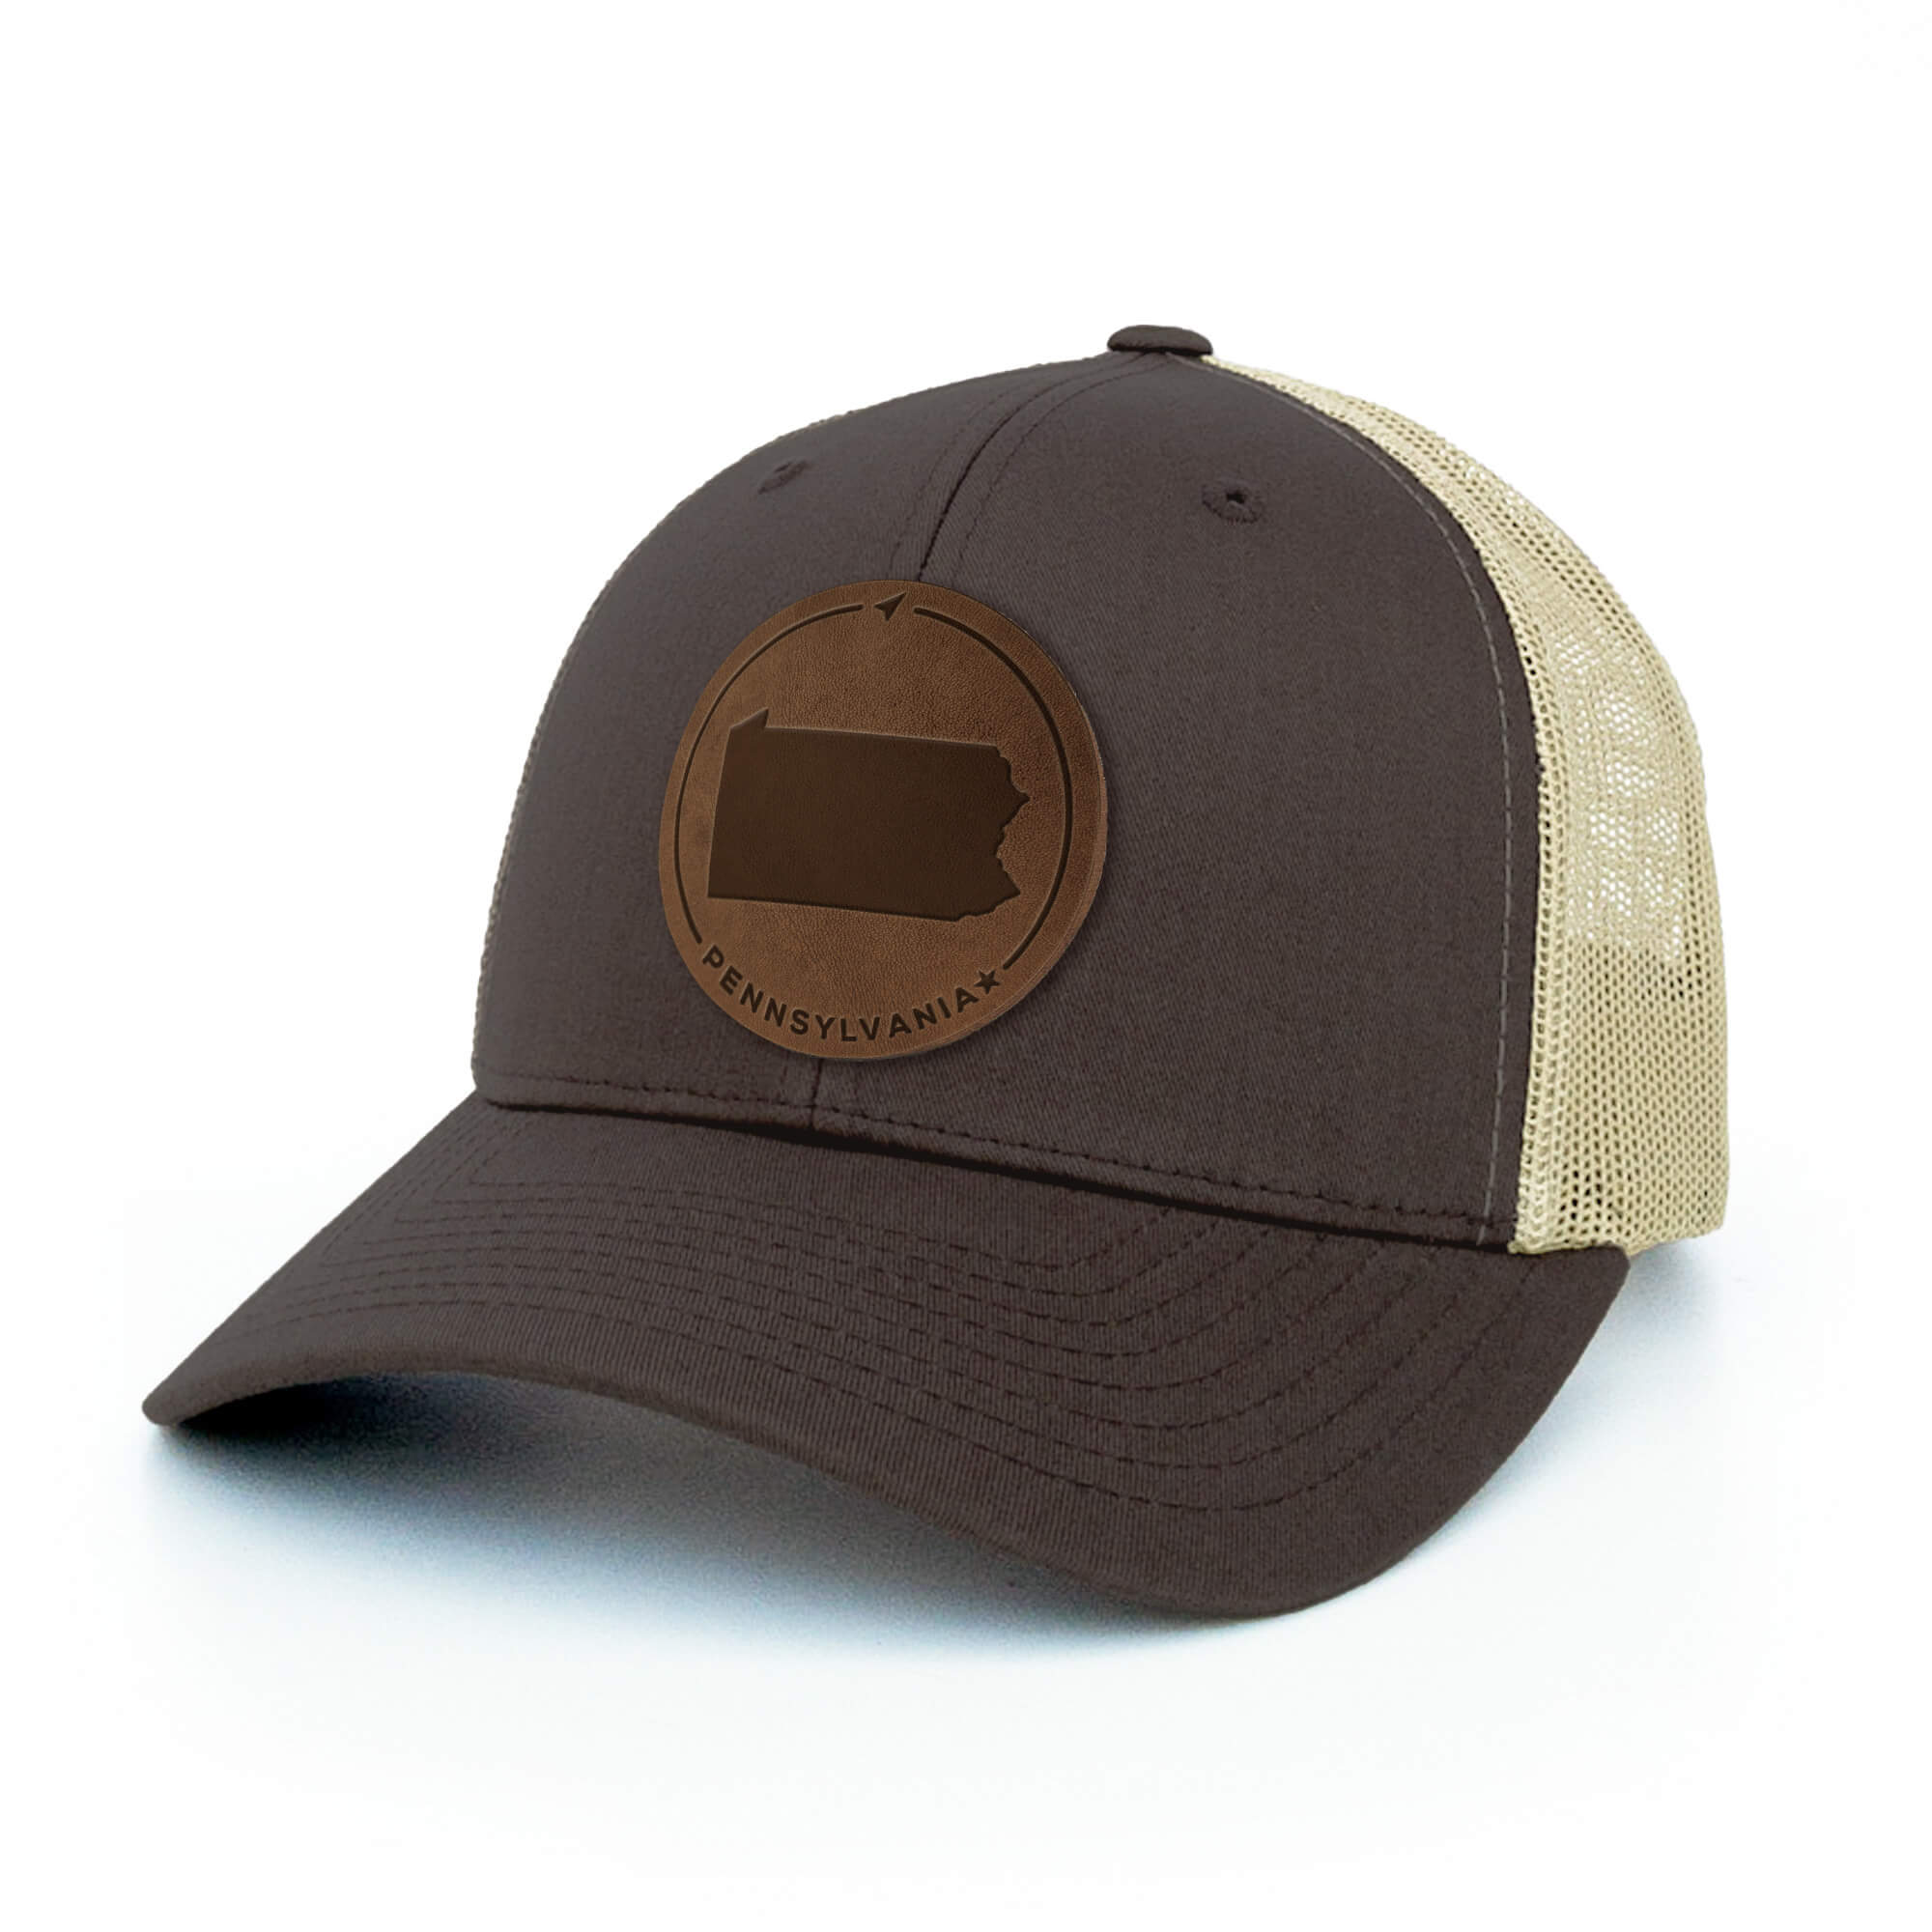 Brown and khaki trucker hat with full-grain leather patch of Pennsylvania | BLACK-003-003, CHARC-003-003, NAVY-003-003, HGREY-003-003, MOSS-003-003, BROWN-003-003